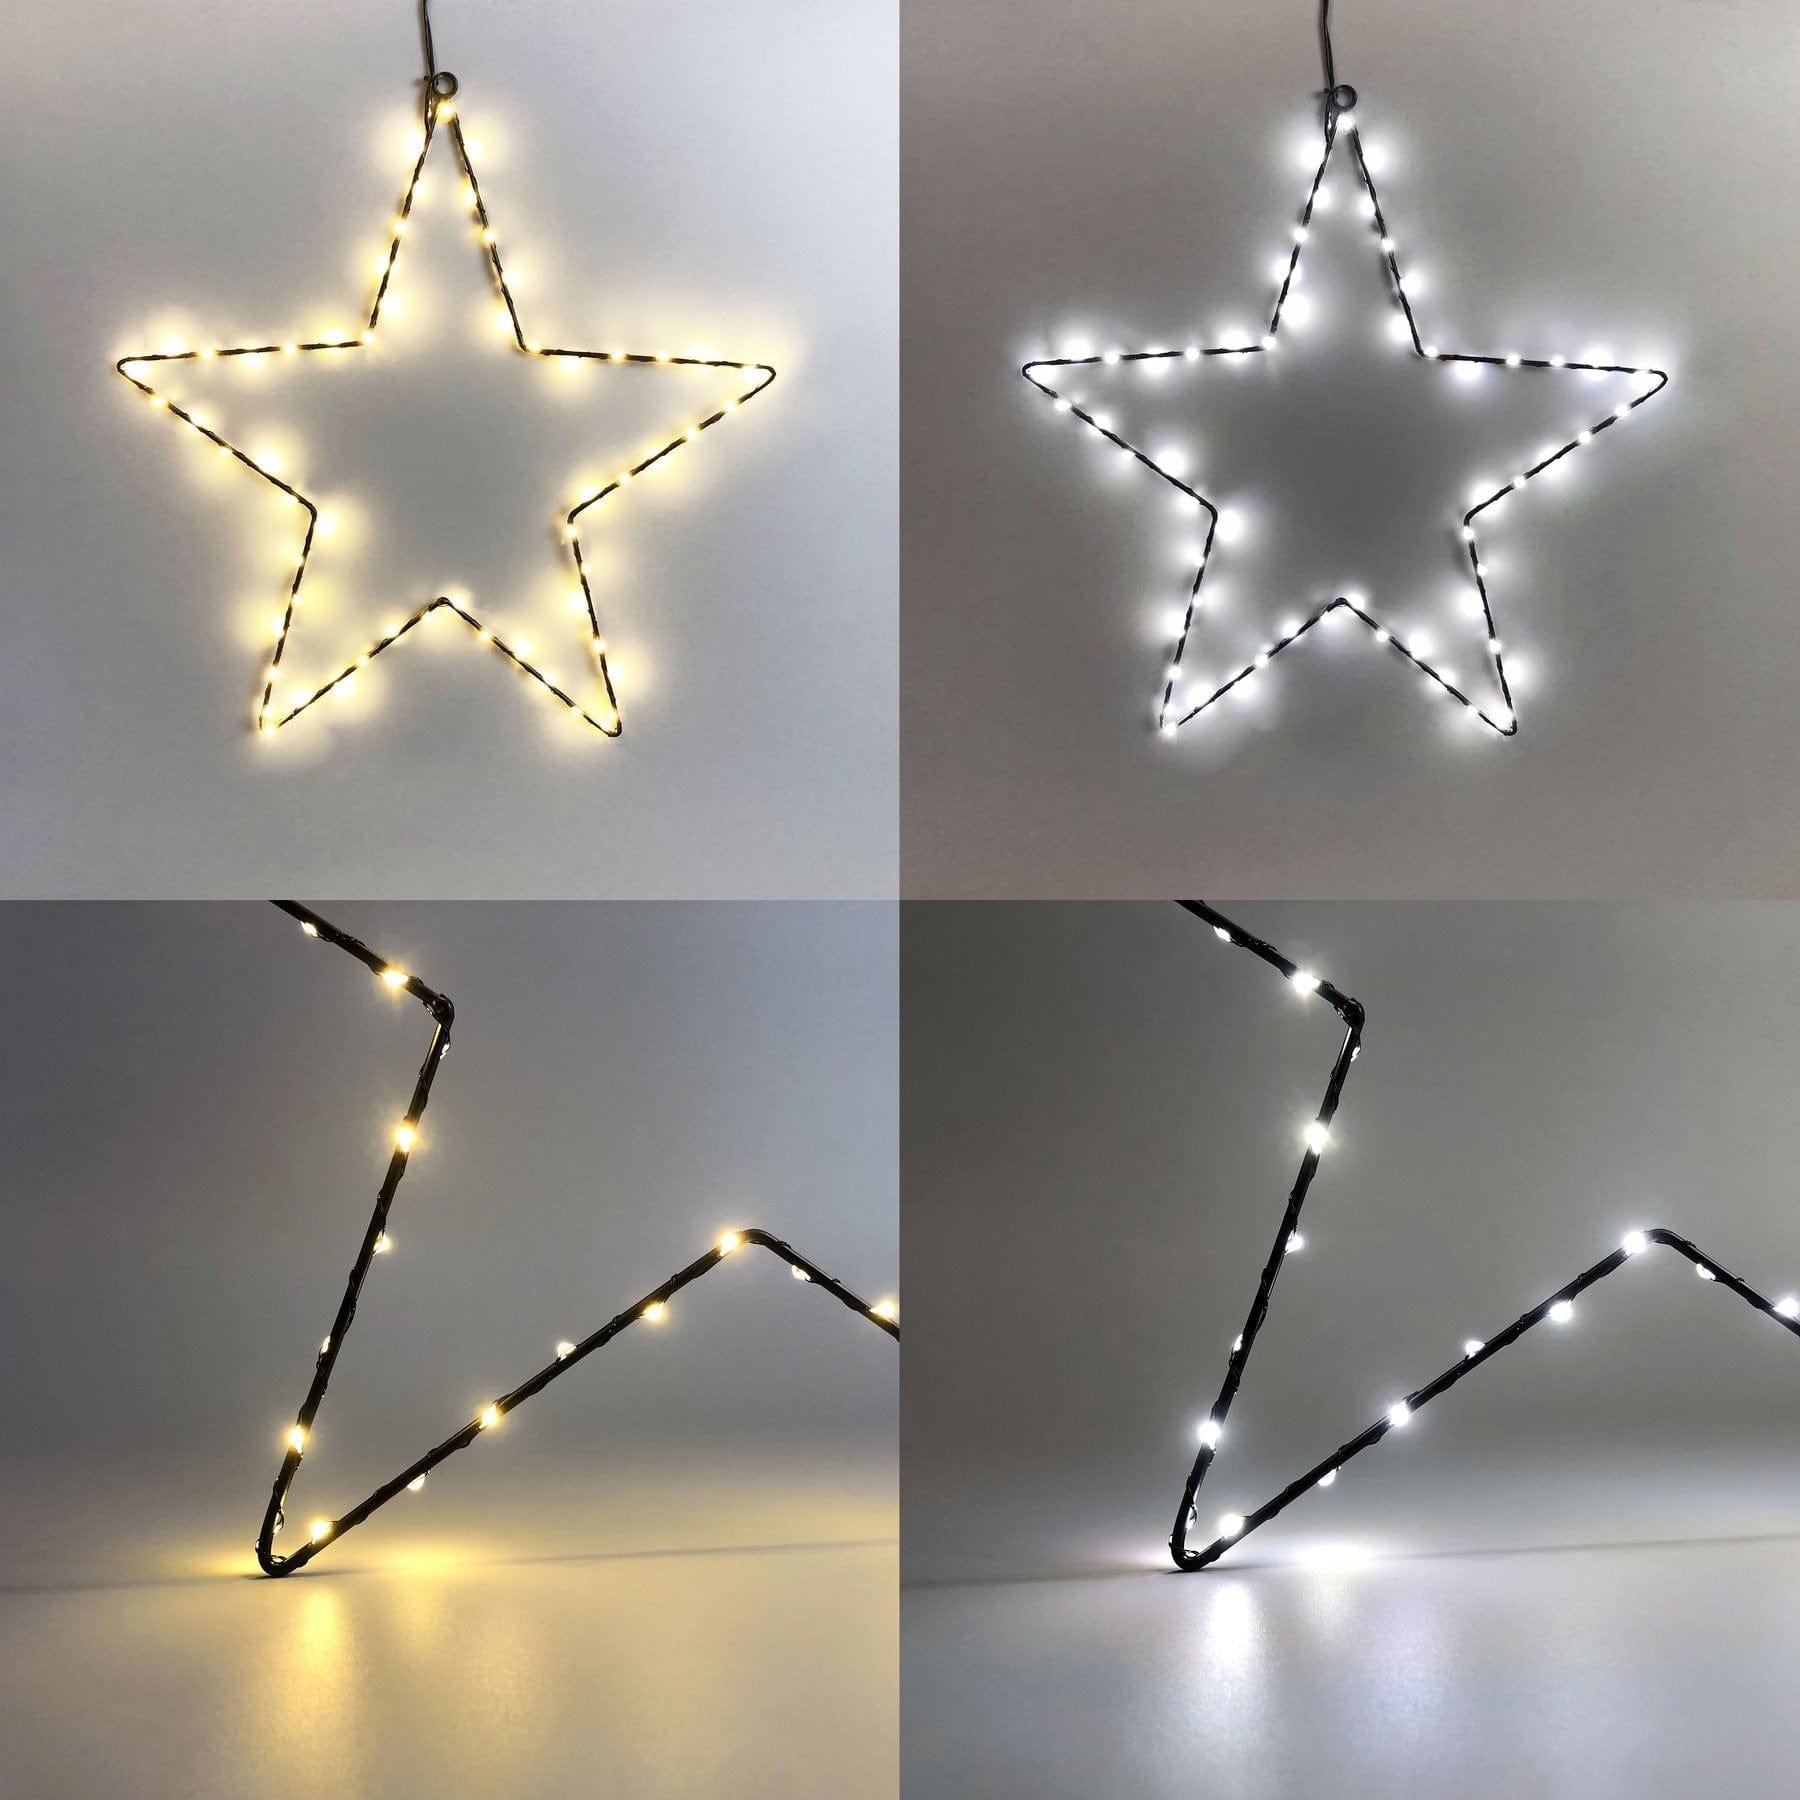 Lexi Lighting Christmas Ceiling&Wall Decoration 40cm Hanging Star with Dual Color LED - 2 Size Options MIC001S